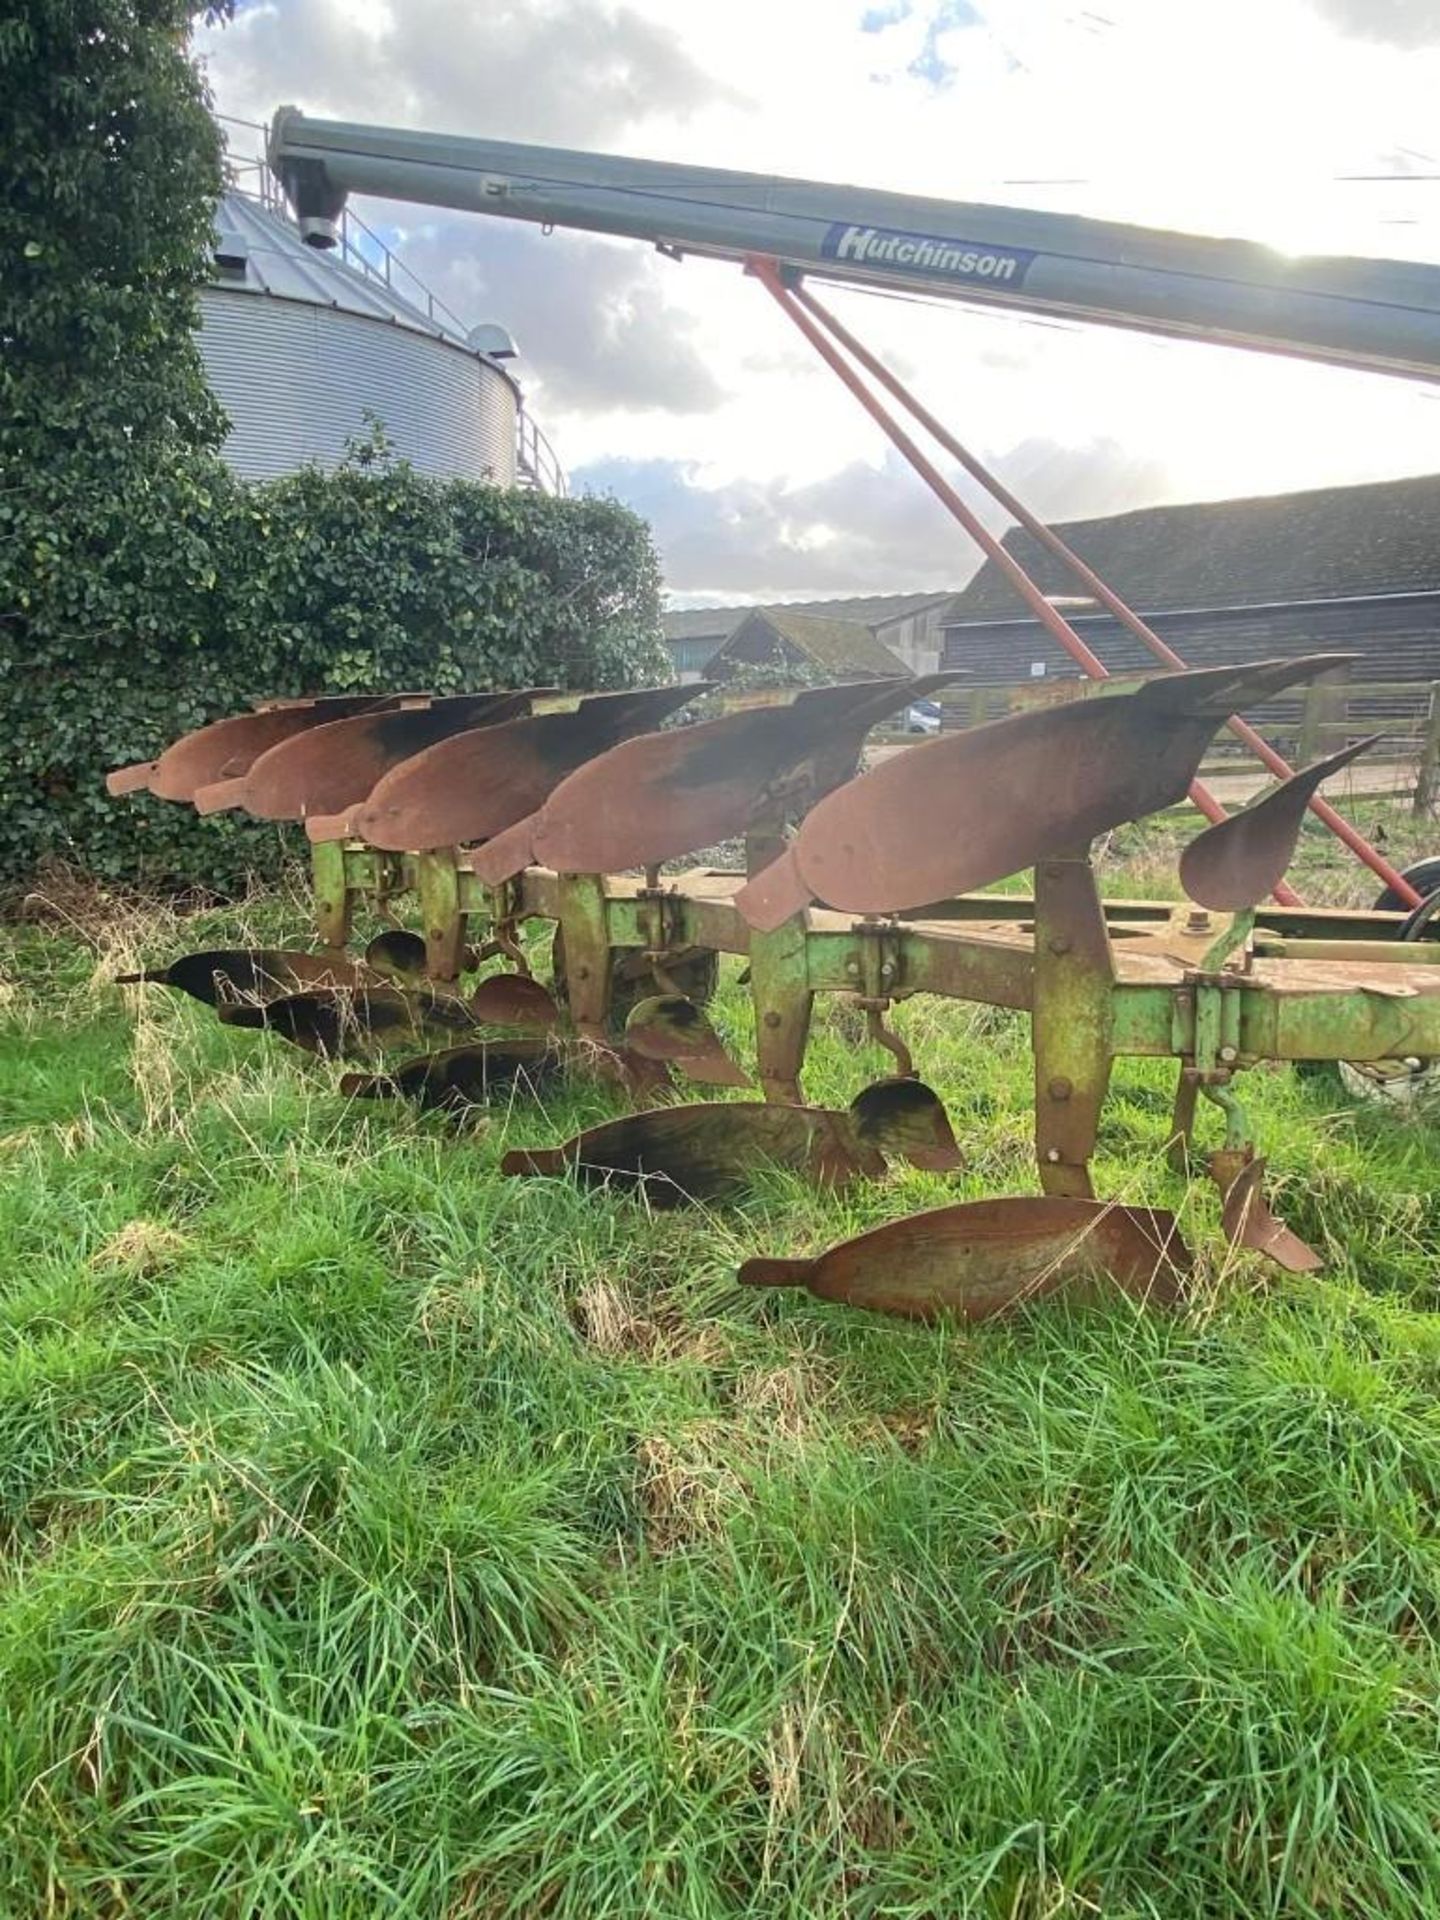 Dowdeswell 5 Furrow Plough - (Bedfordshire) - Image 2 of 6